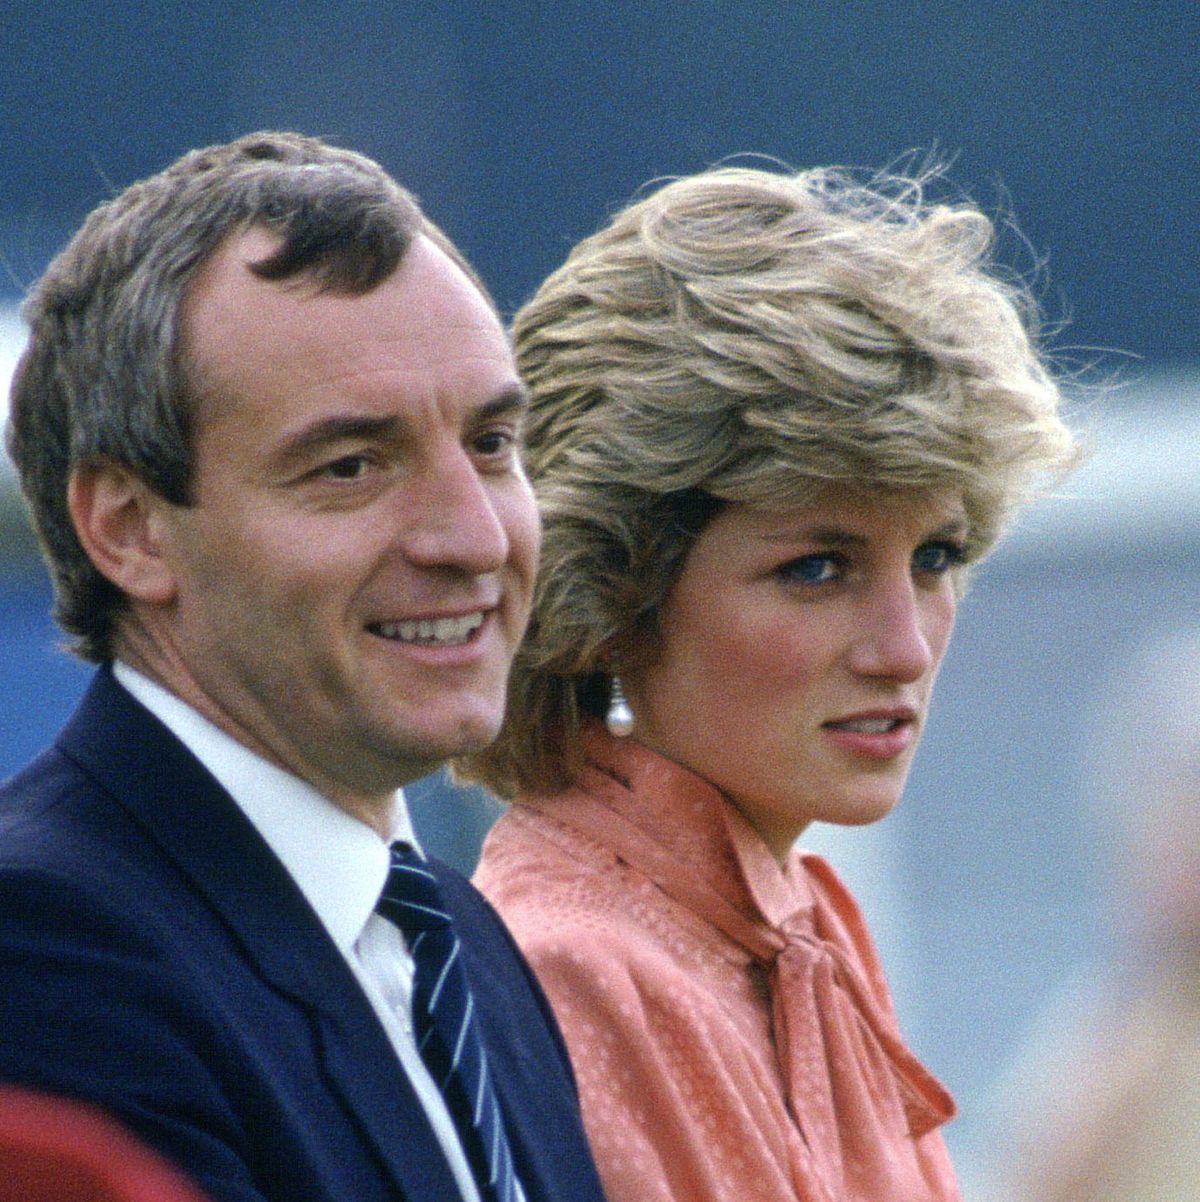 https://hips.hearstapps.com/hmg-prod/images/diana-princess-of-wales-laughing-with-her-police-bodyguard-news-photo-1604332883.?crop=1.00xw:0.641xh;0,0&resize=1200:*